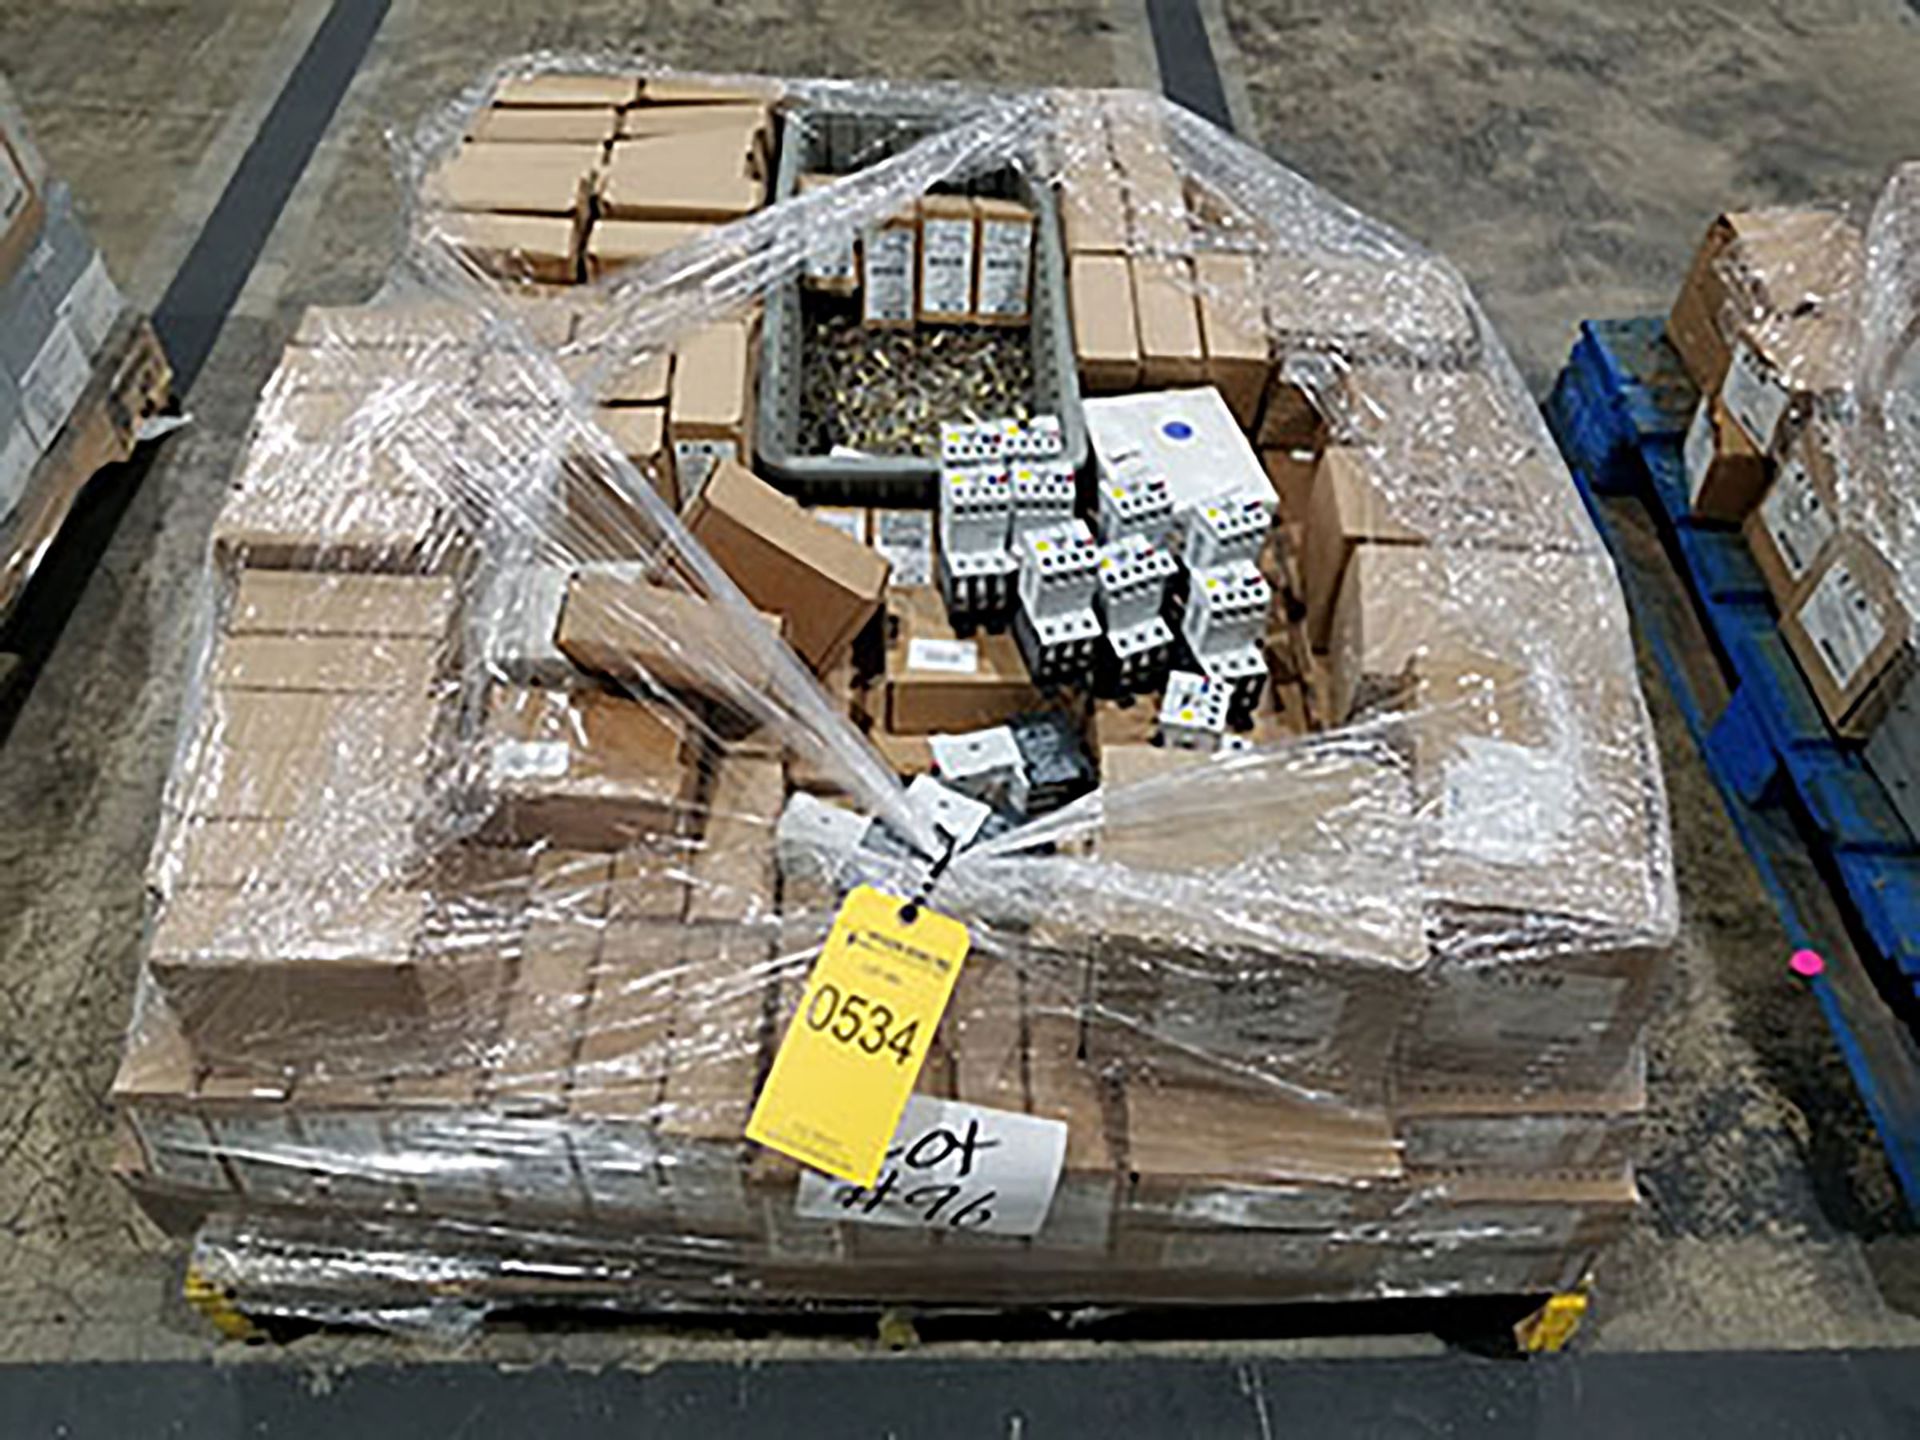 PALLET OF (NEW IN BOX) SOFT STARTERS, TRANSFORMERS, ELECTRIC BASE BOARDS, DAMAGED NGS MCCB, AND